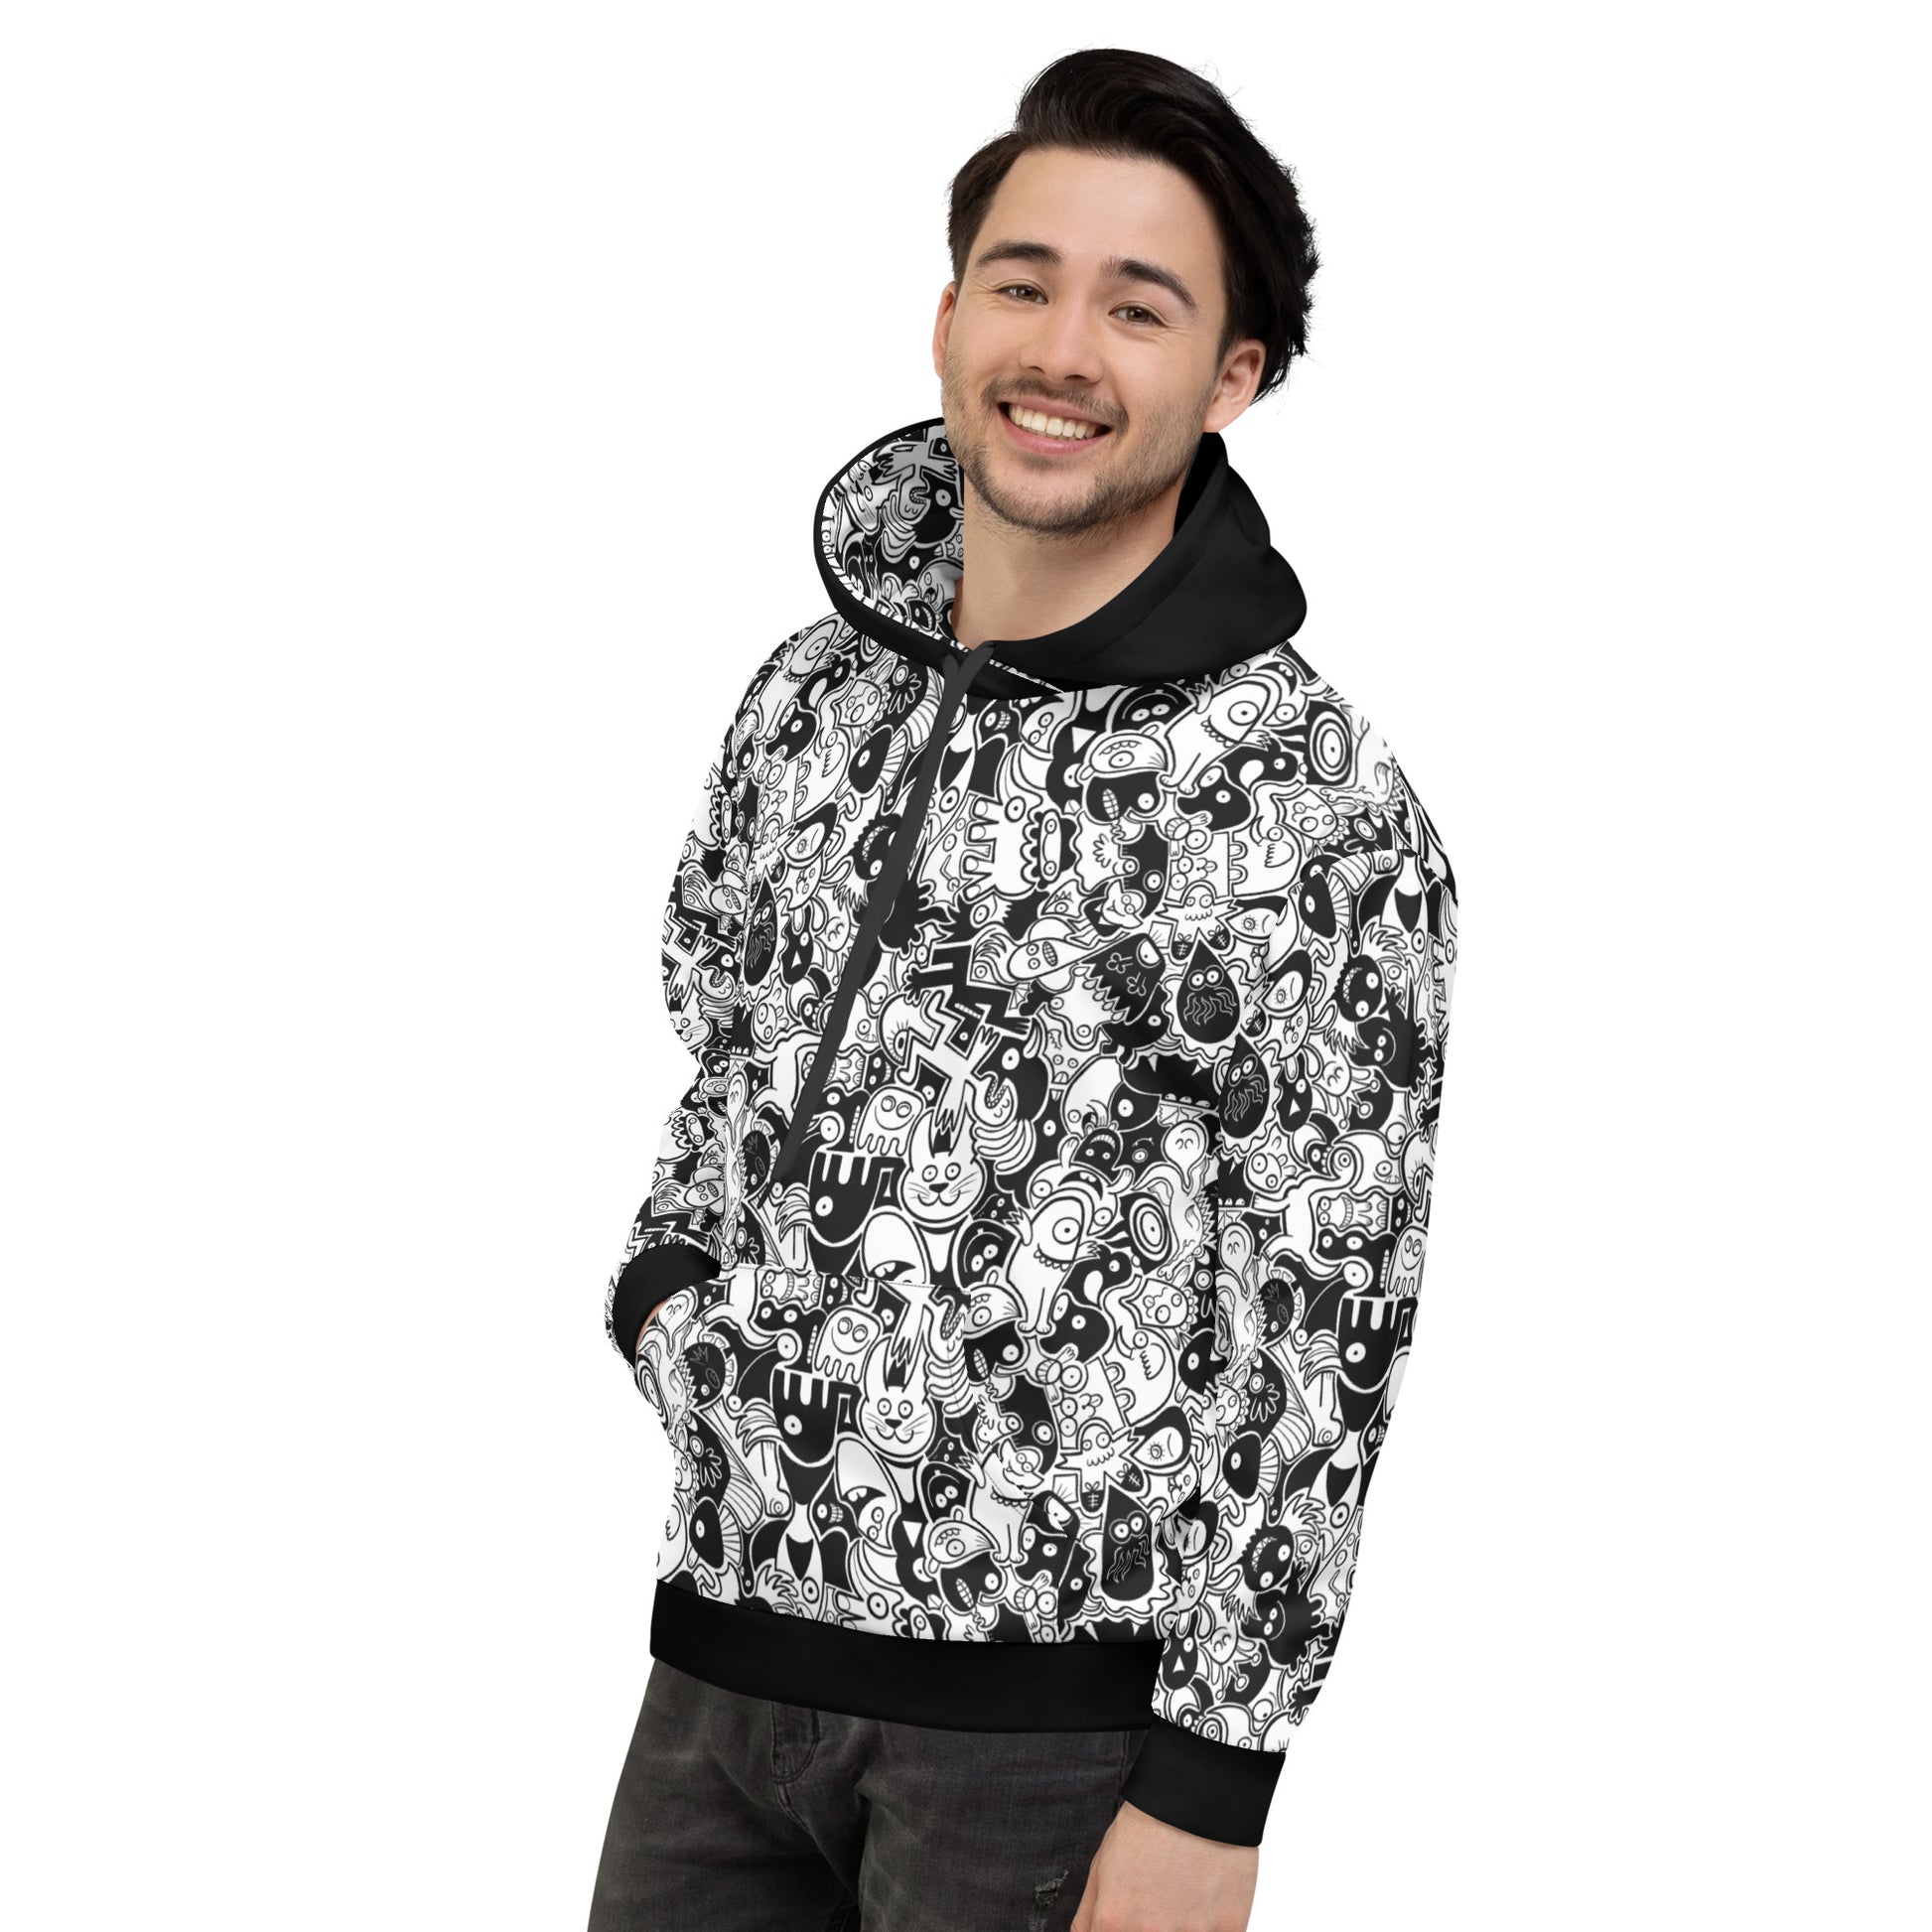 Smiling man wearing Unisex Hoodie All-over printed with Joyful crowd of black and white doodle creatures